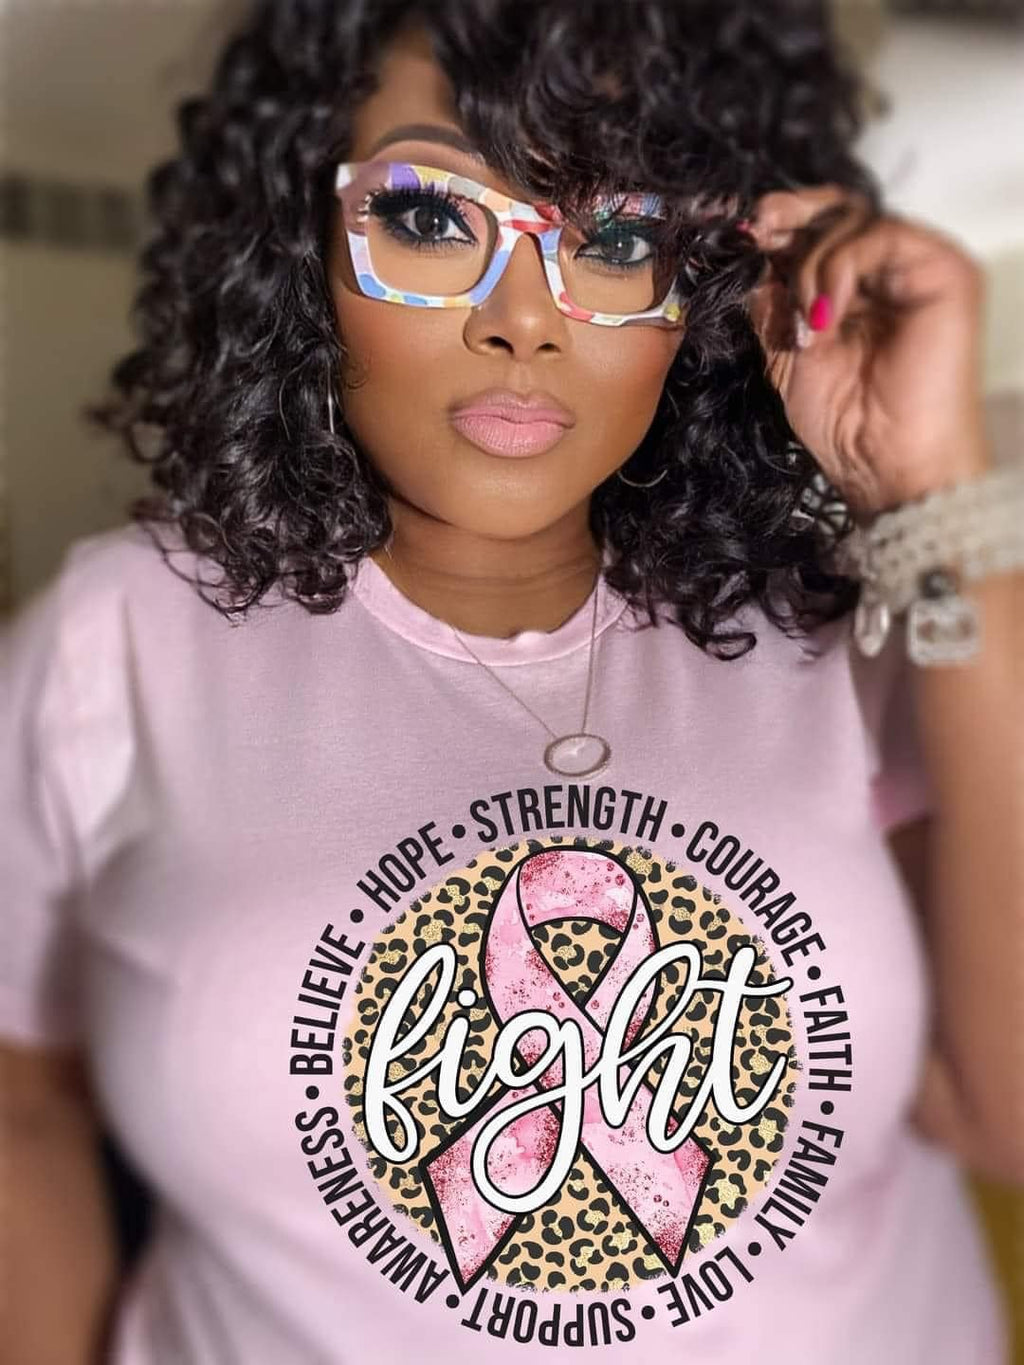 Fight Breast Cancer tee